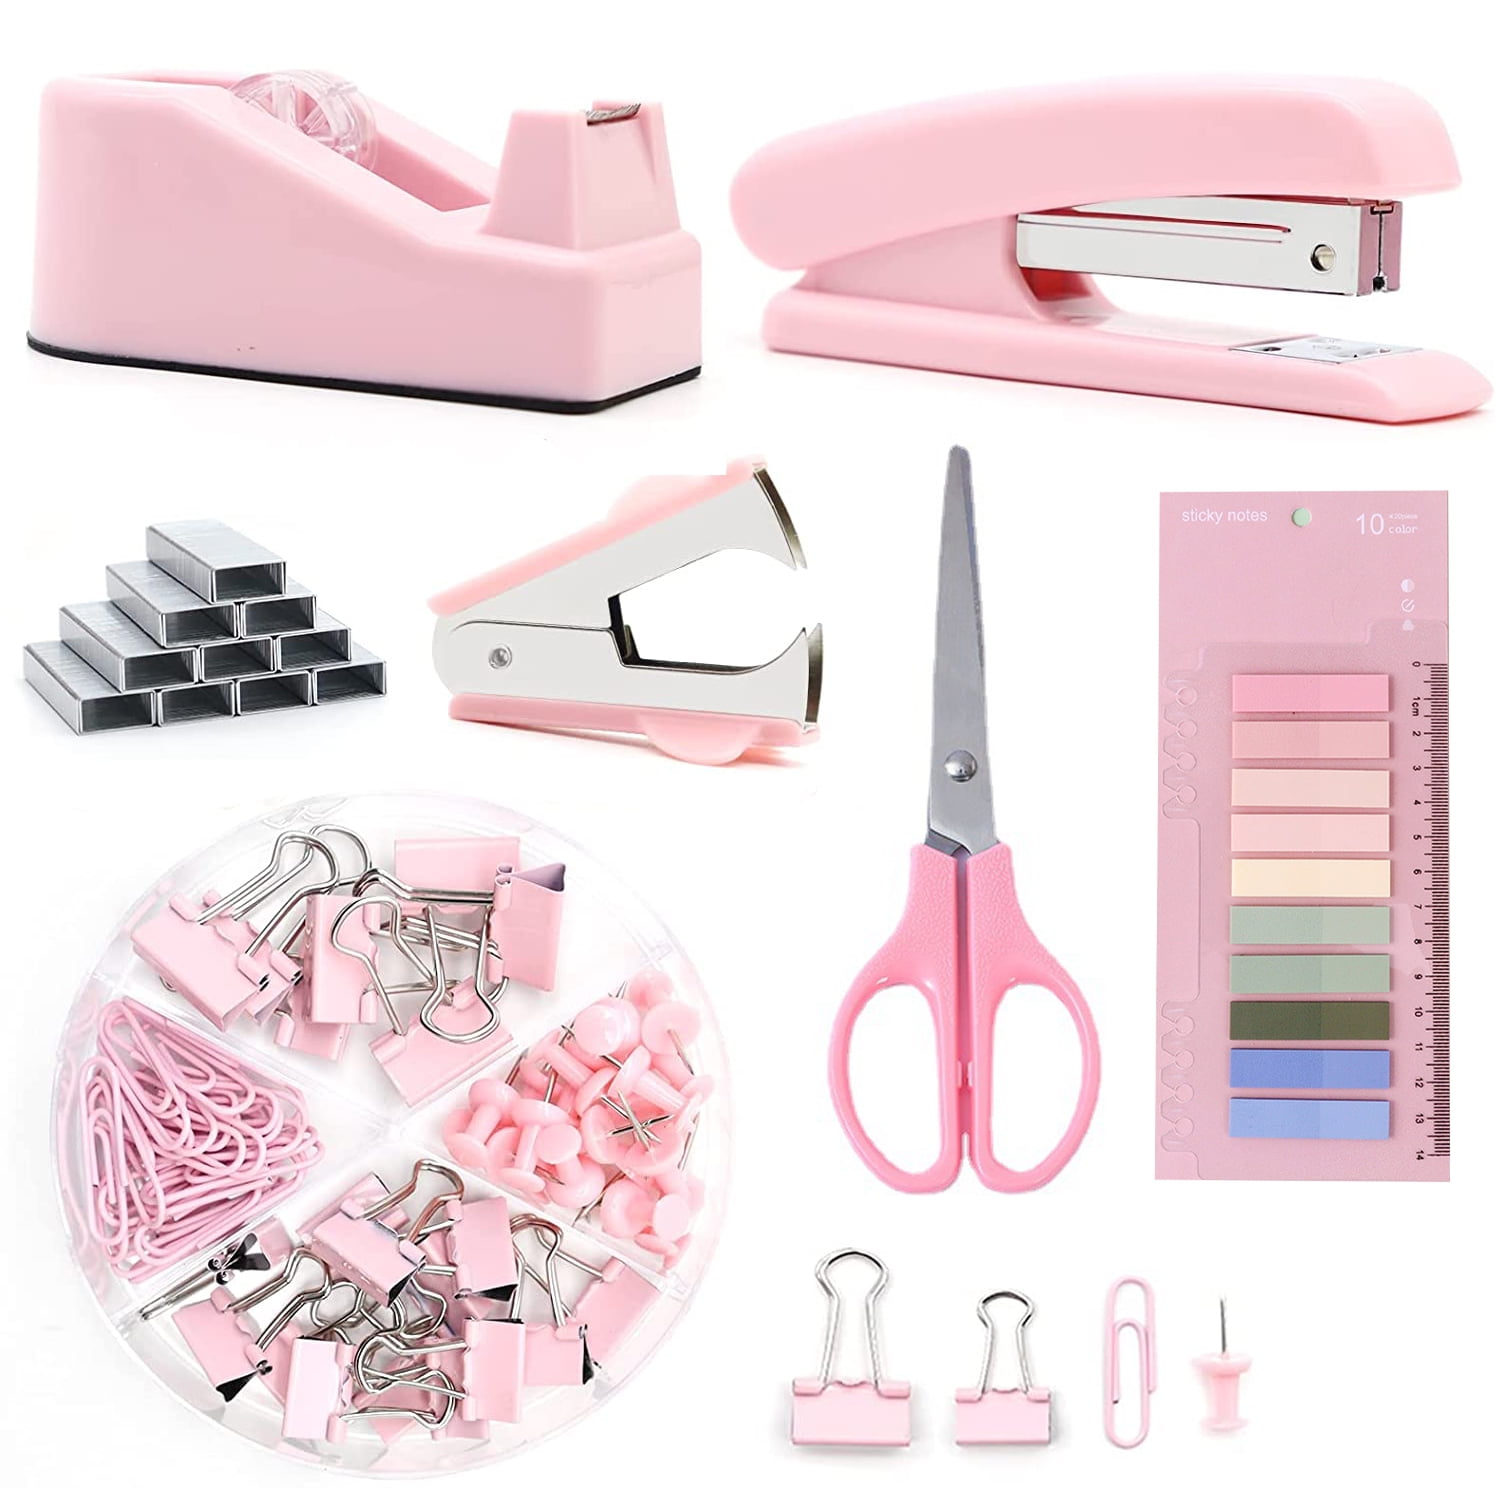 Sytle-Carry Pink Office Supplies, Desk Organizers and Accessories Office  Supplies with Staple Remover, Stapler, Tape Dispenser, Staples, Clips